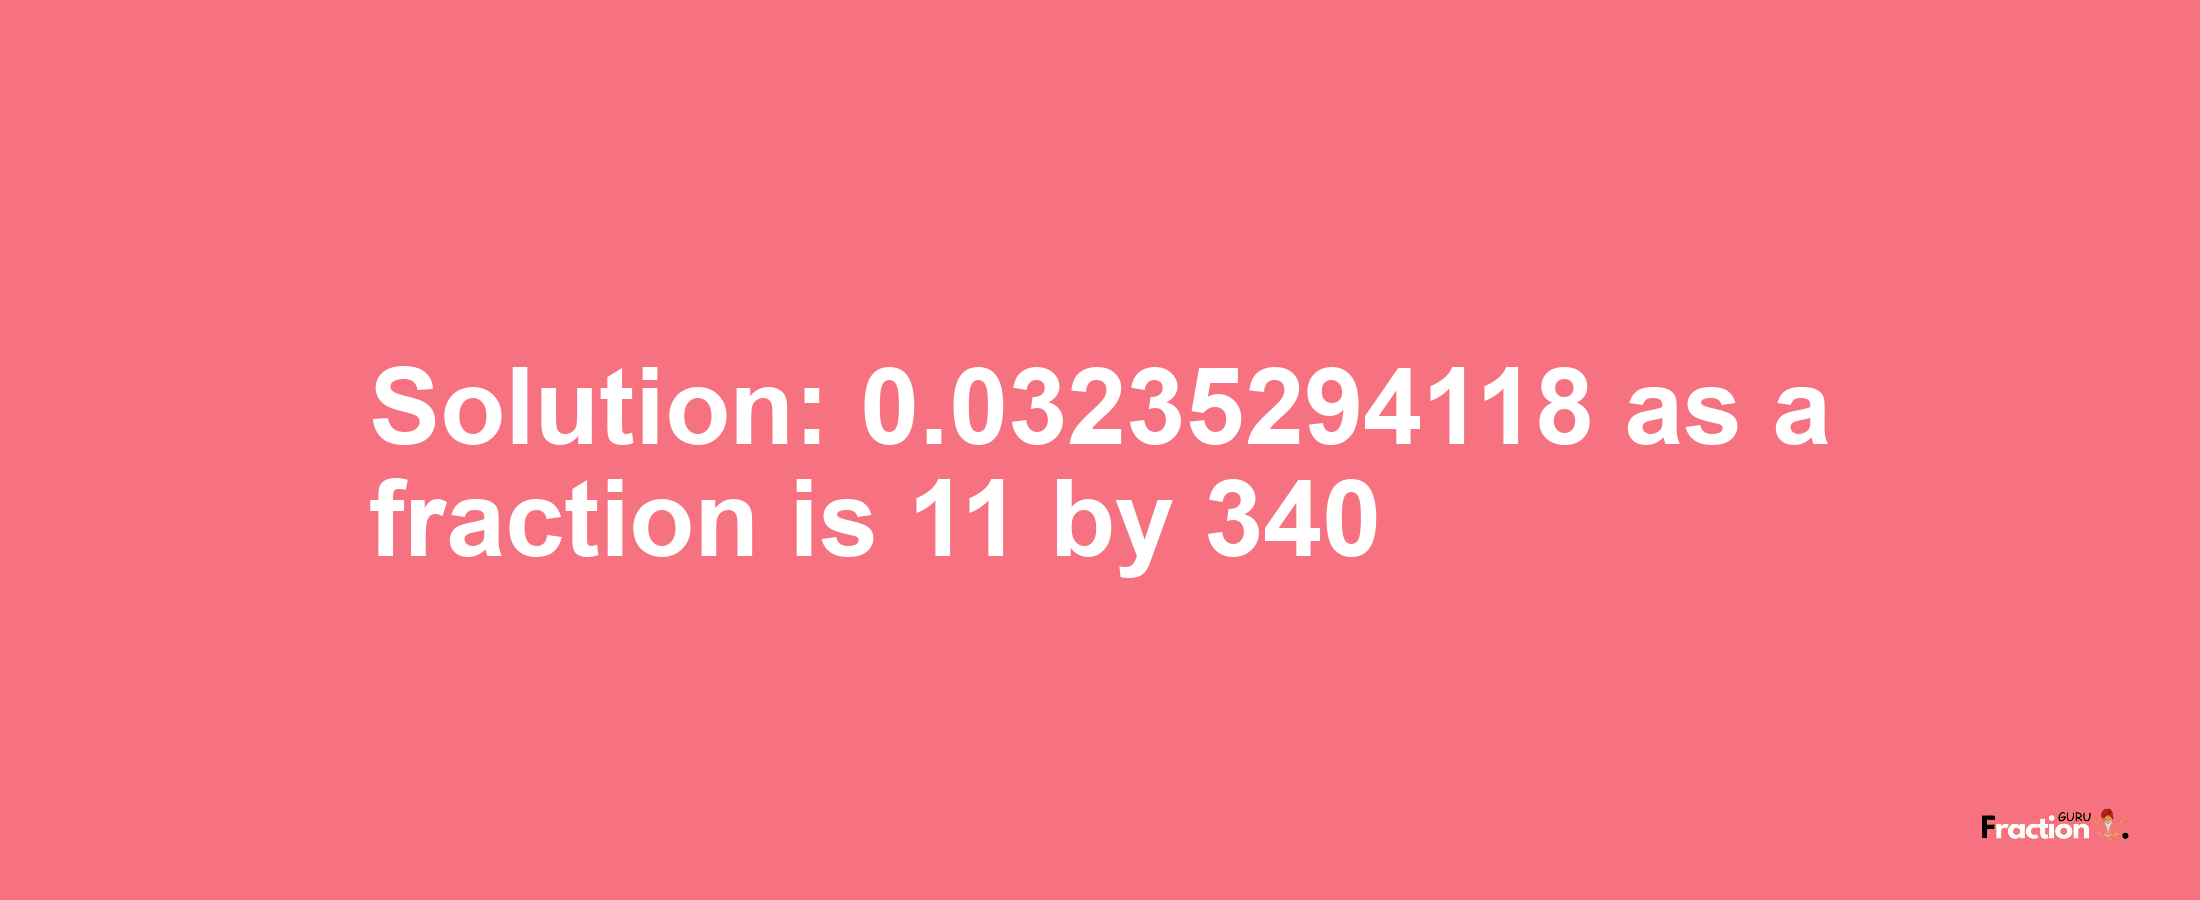 Solution:0.03235294118 as a fraction is 11/340